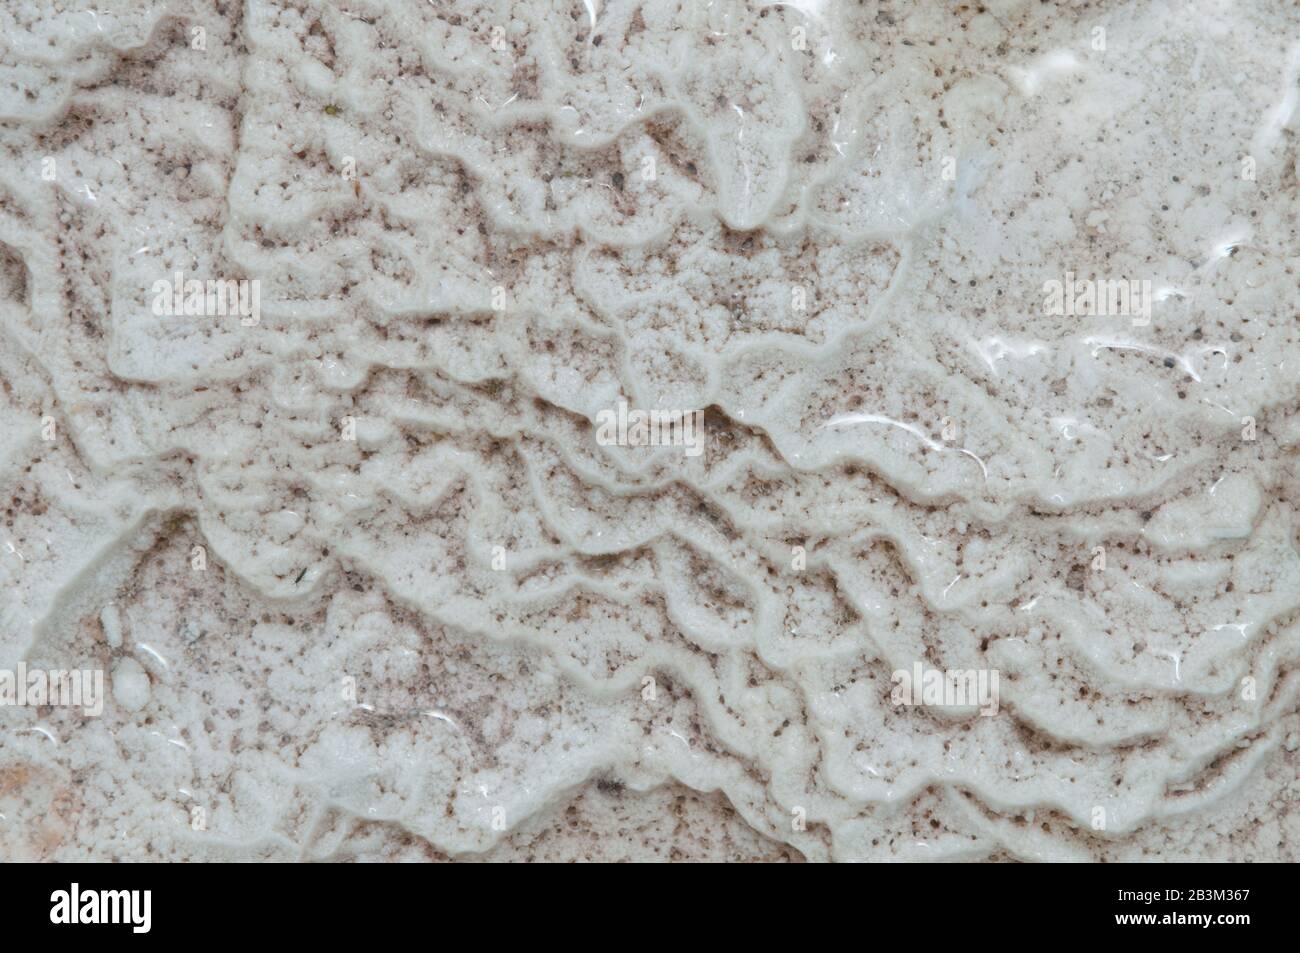 Such pattern is made from adarce (Caucasus Mountains). Travertine is a form of limestone deposited by mineral springs. Stock Photo